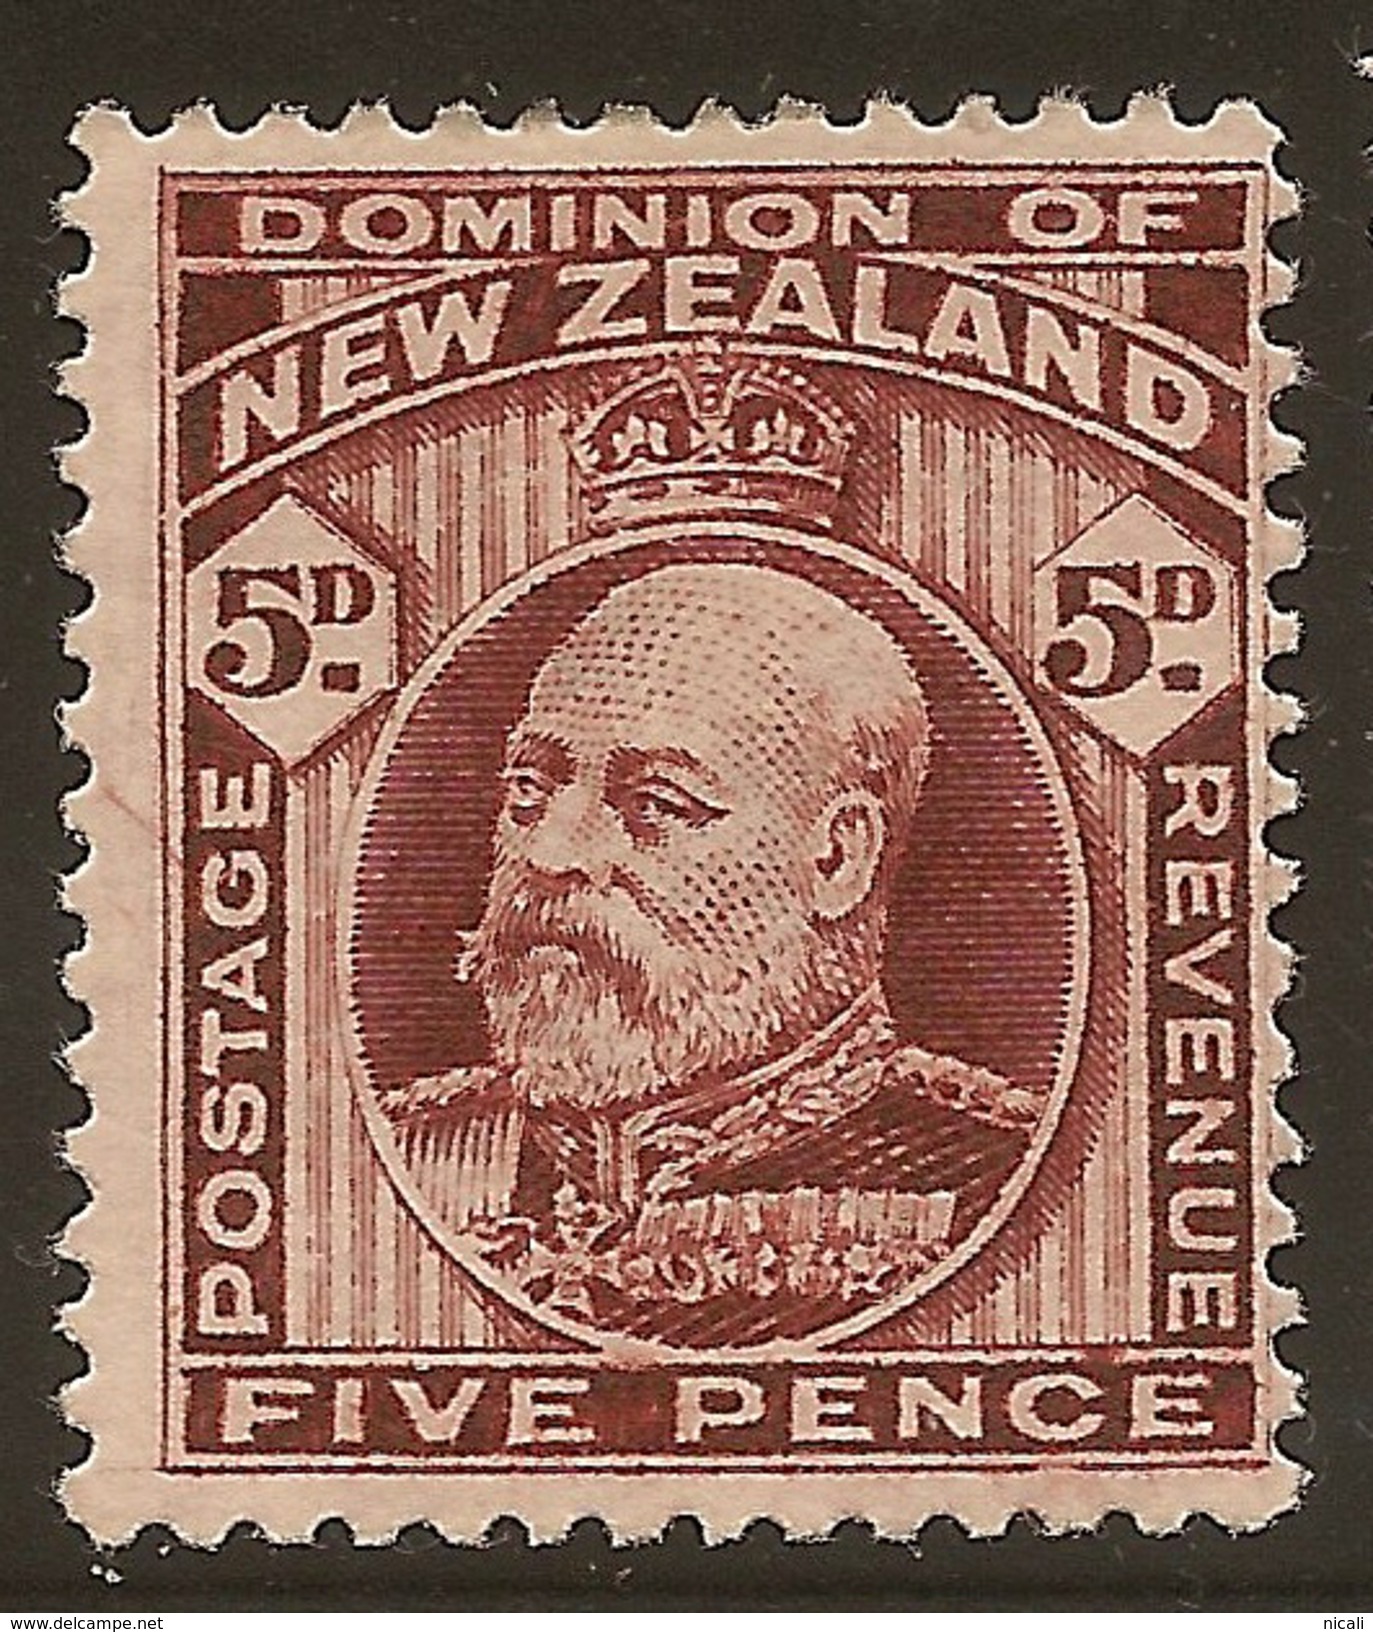 NZ 1909 5d KEVII P14x14.5 SG 391 HM #YS277 - Unused Stamps